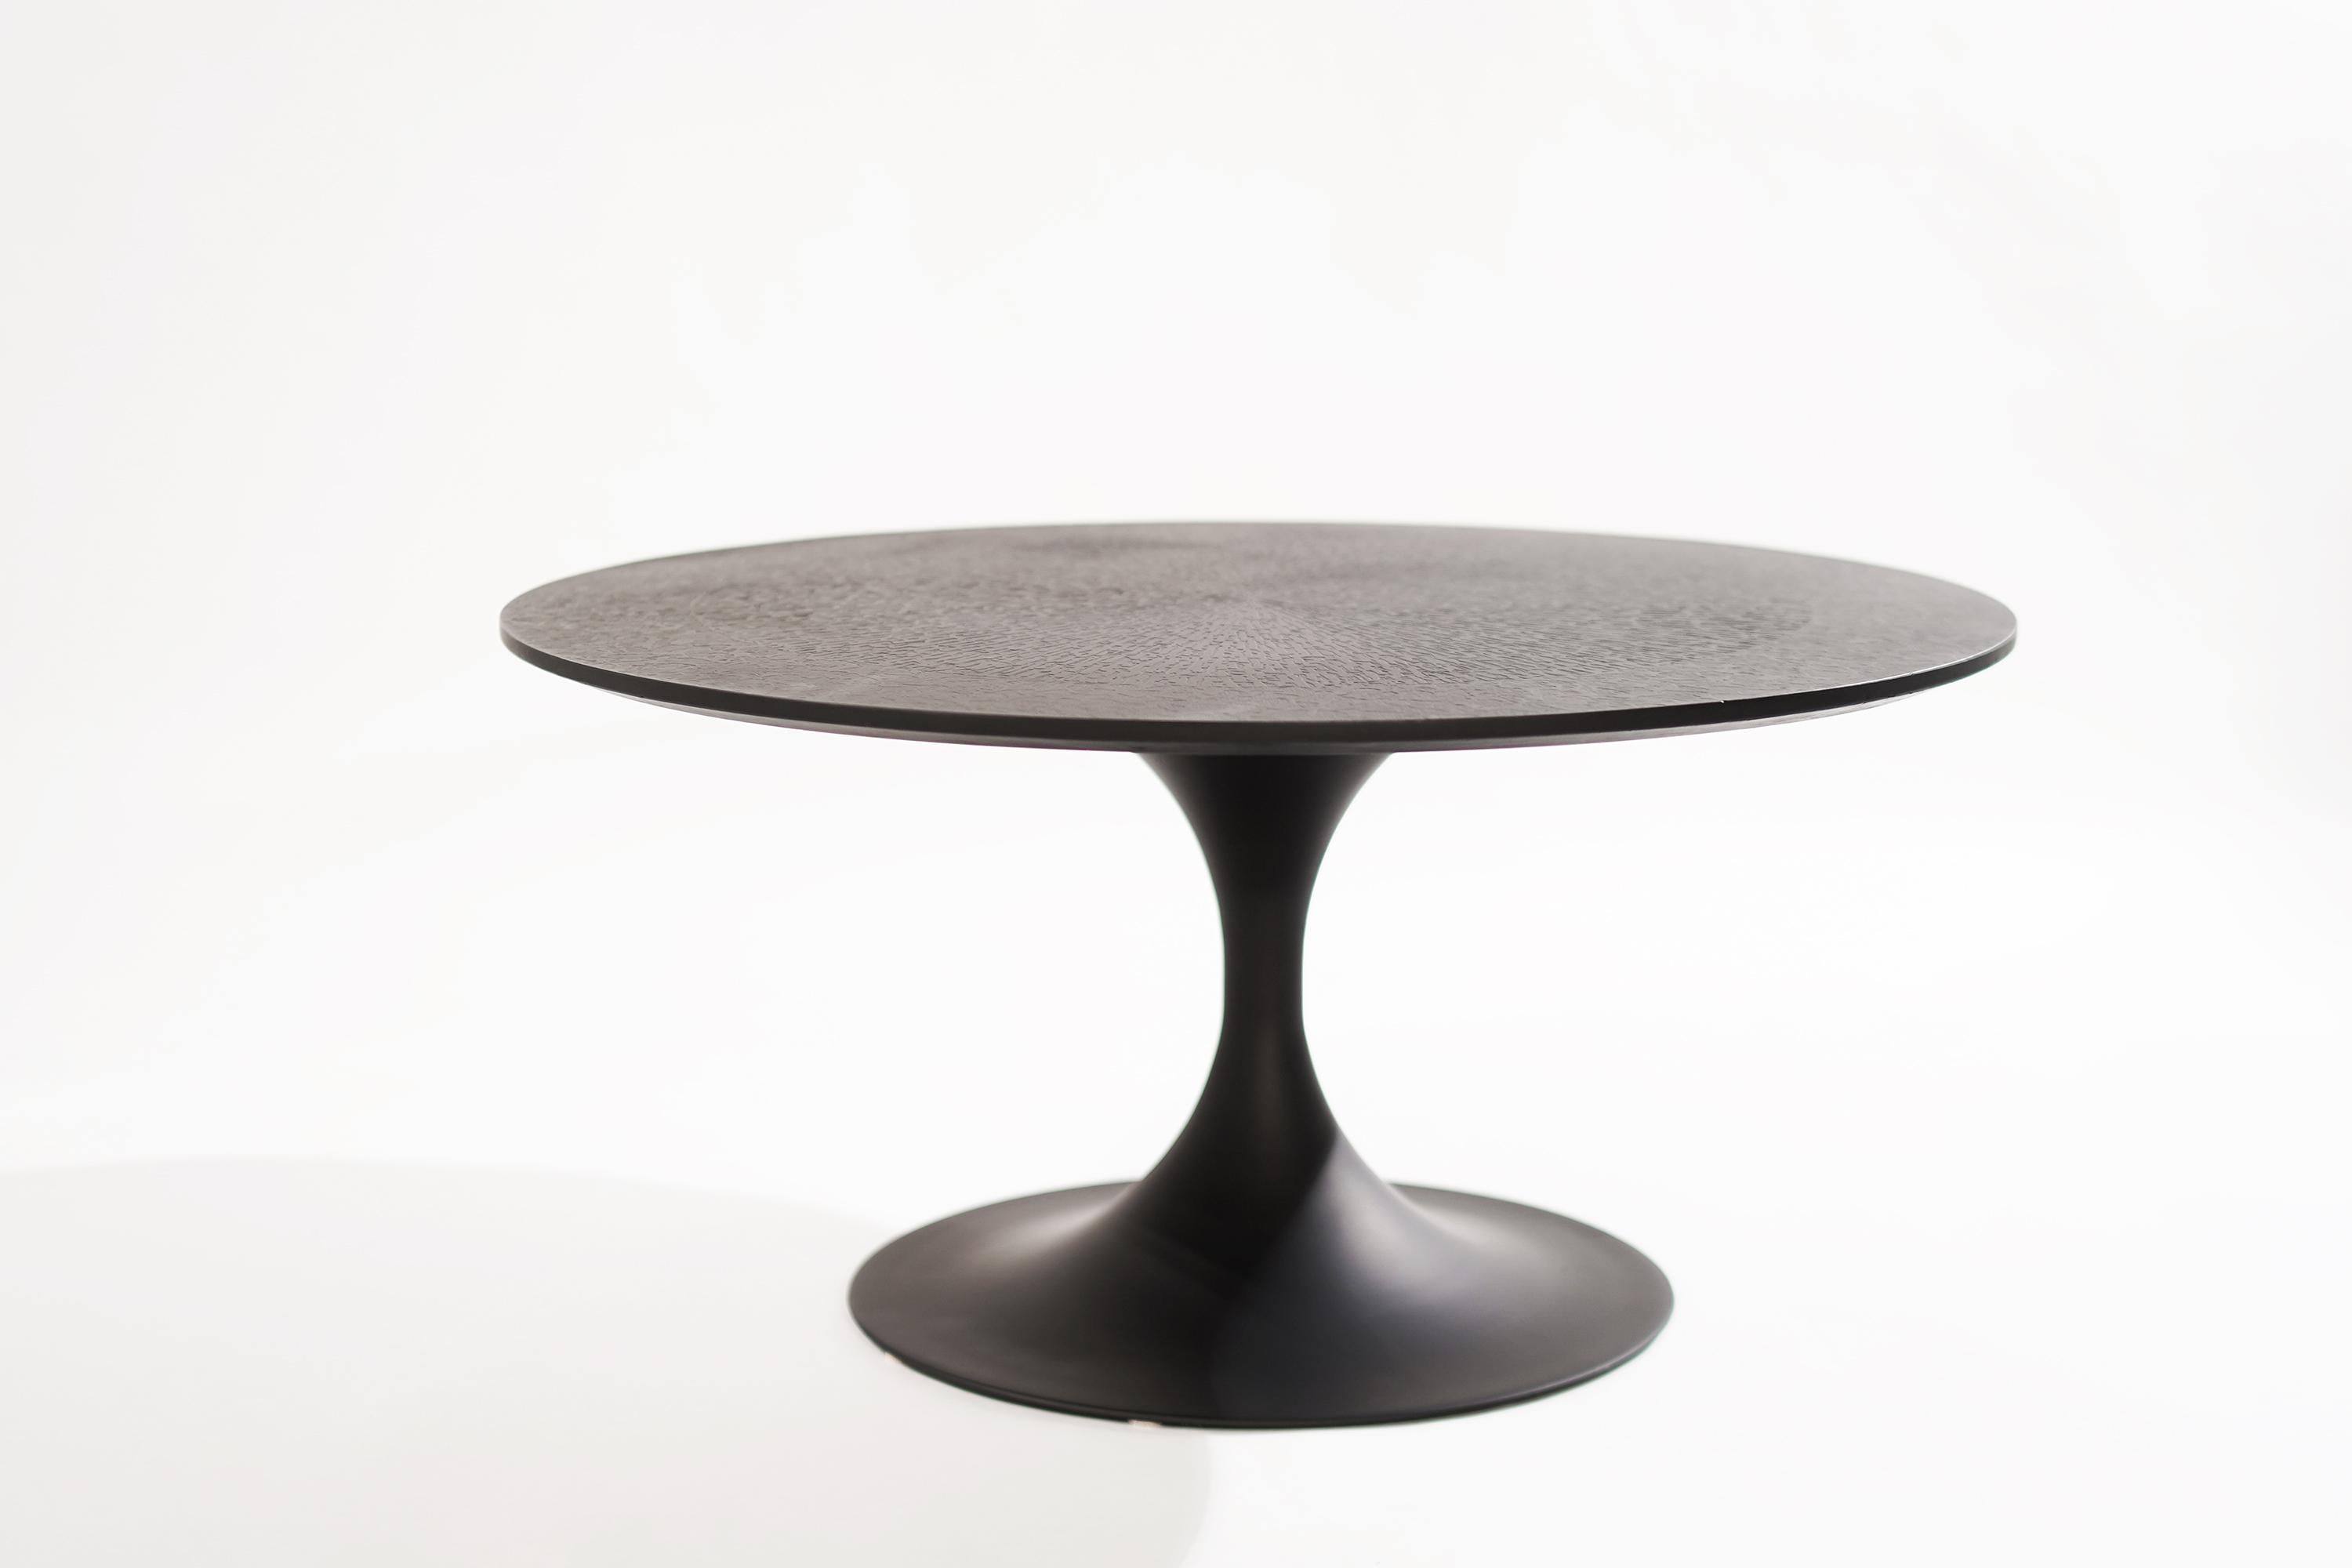 Tulip coffee table in the style of Eero Saarinen for Knoll (unmarked), circa 1950-1959. 
Completely restored, with an unusual textured top.

Other designers from this period include Milo Baughman, Vladimir Kagan, Hans Wegner, Gio Ponti, and Ico